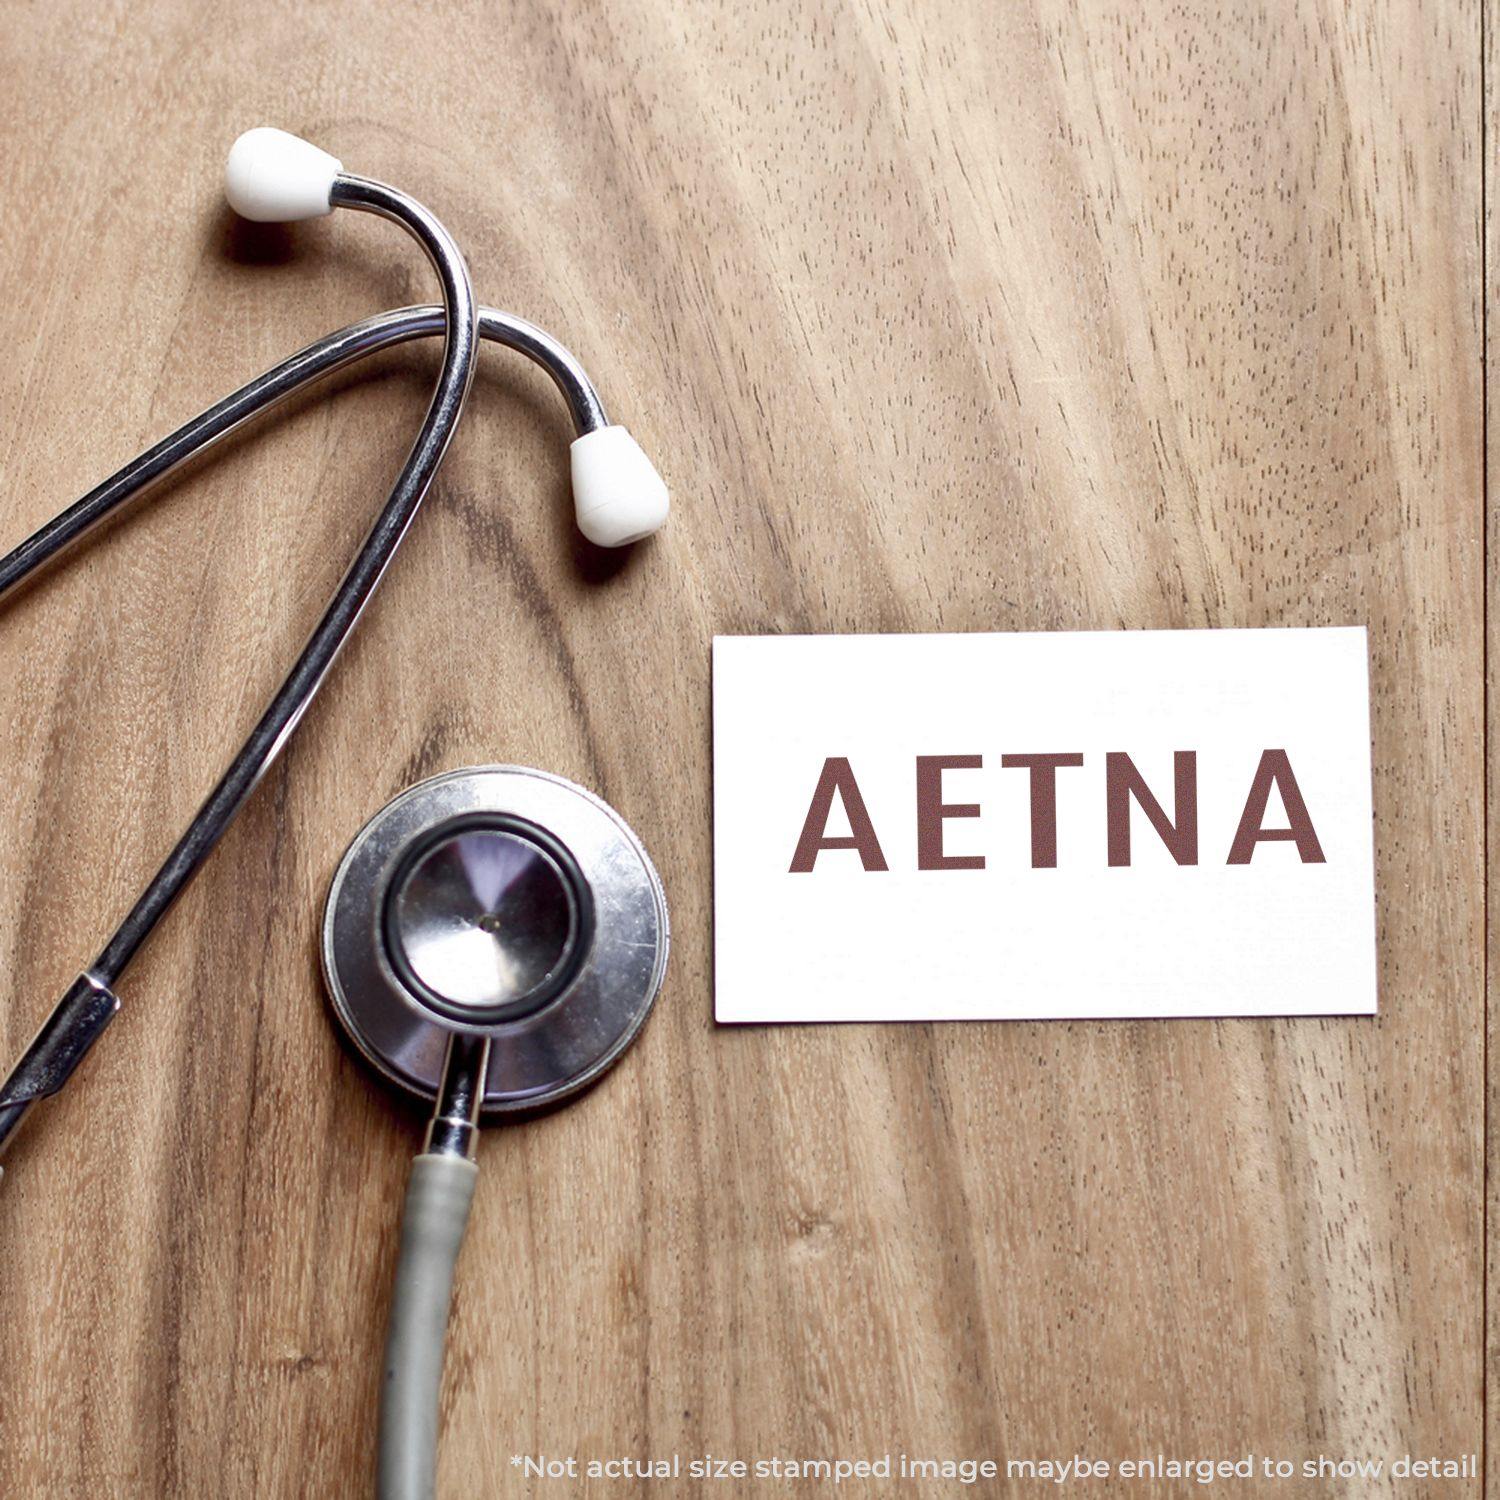 A self-inking stamp with a stamped image showing how the text "AETNA" in a large bold font is displayed by it.